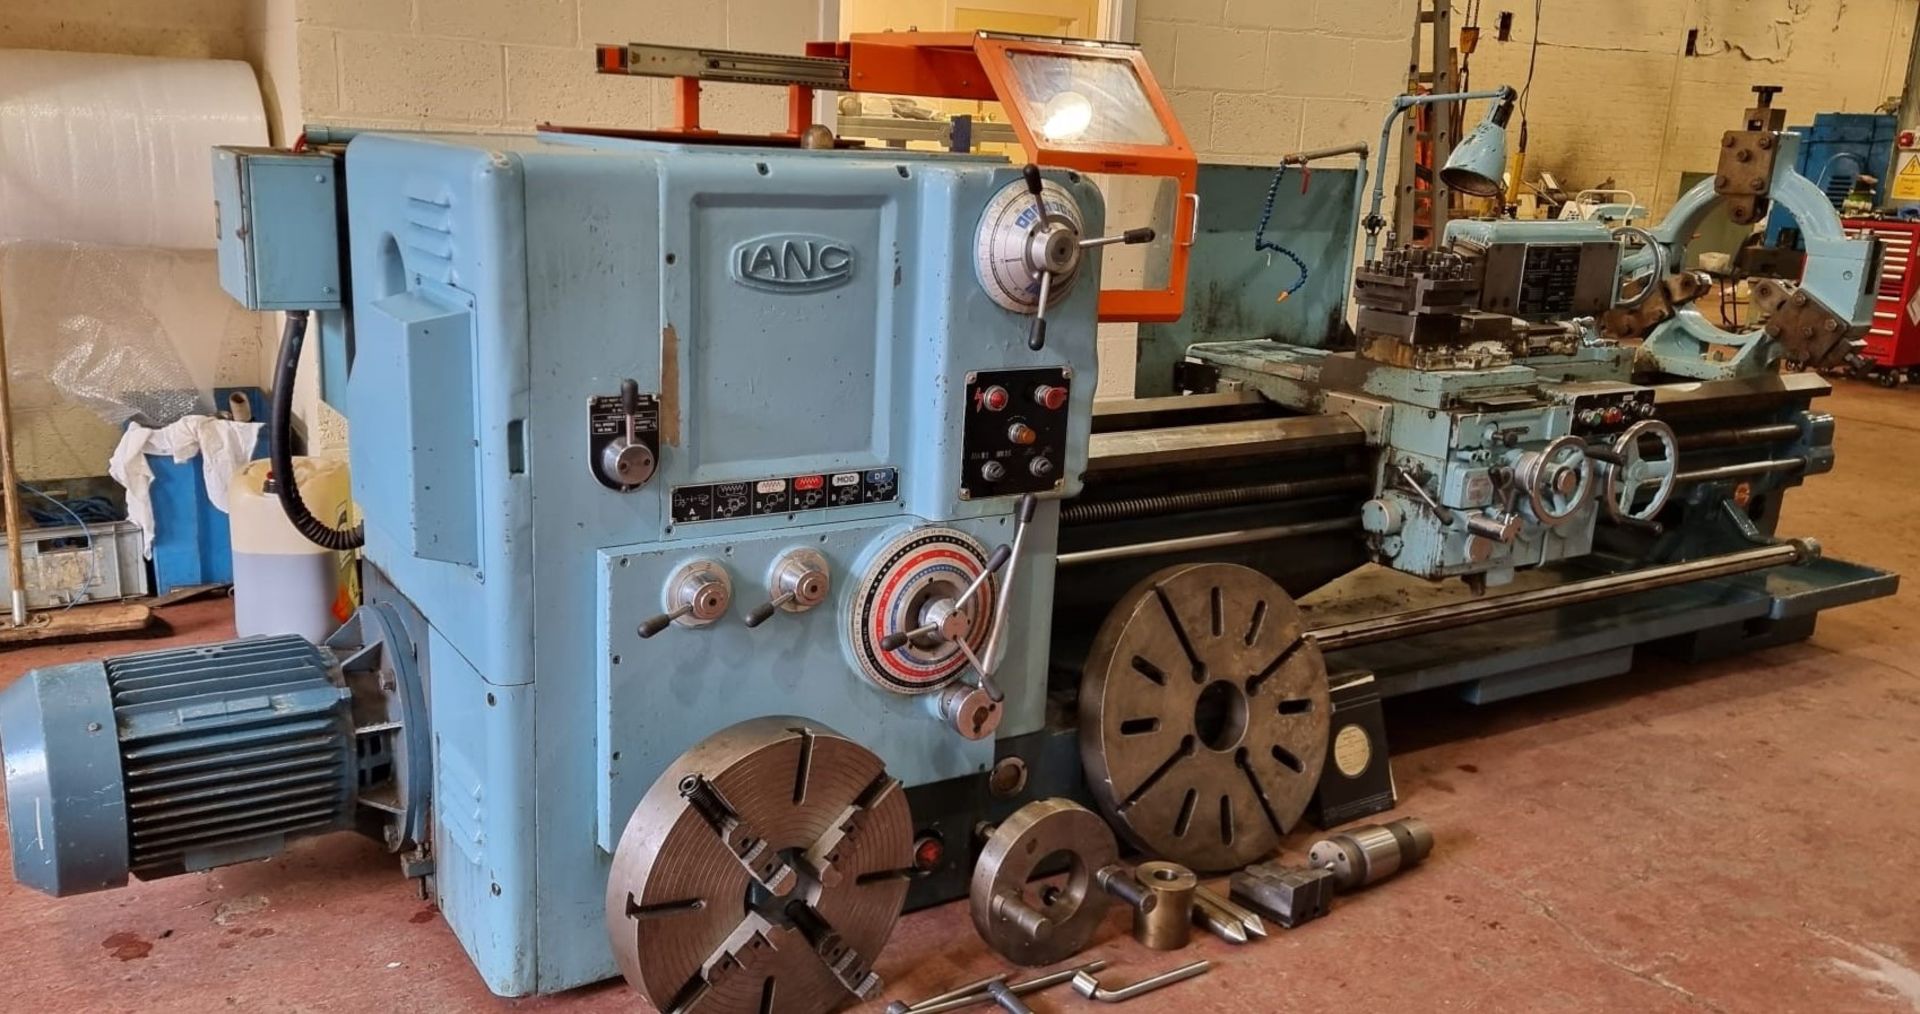 Lang 25 D Electrofeed Straight Bed Lathe - Image 3 of 8